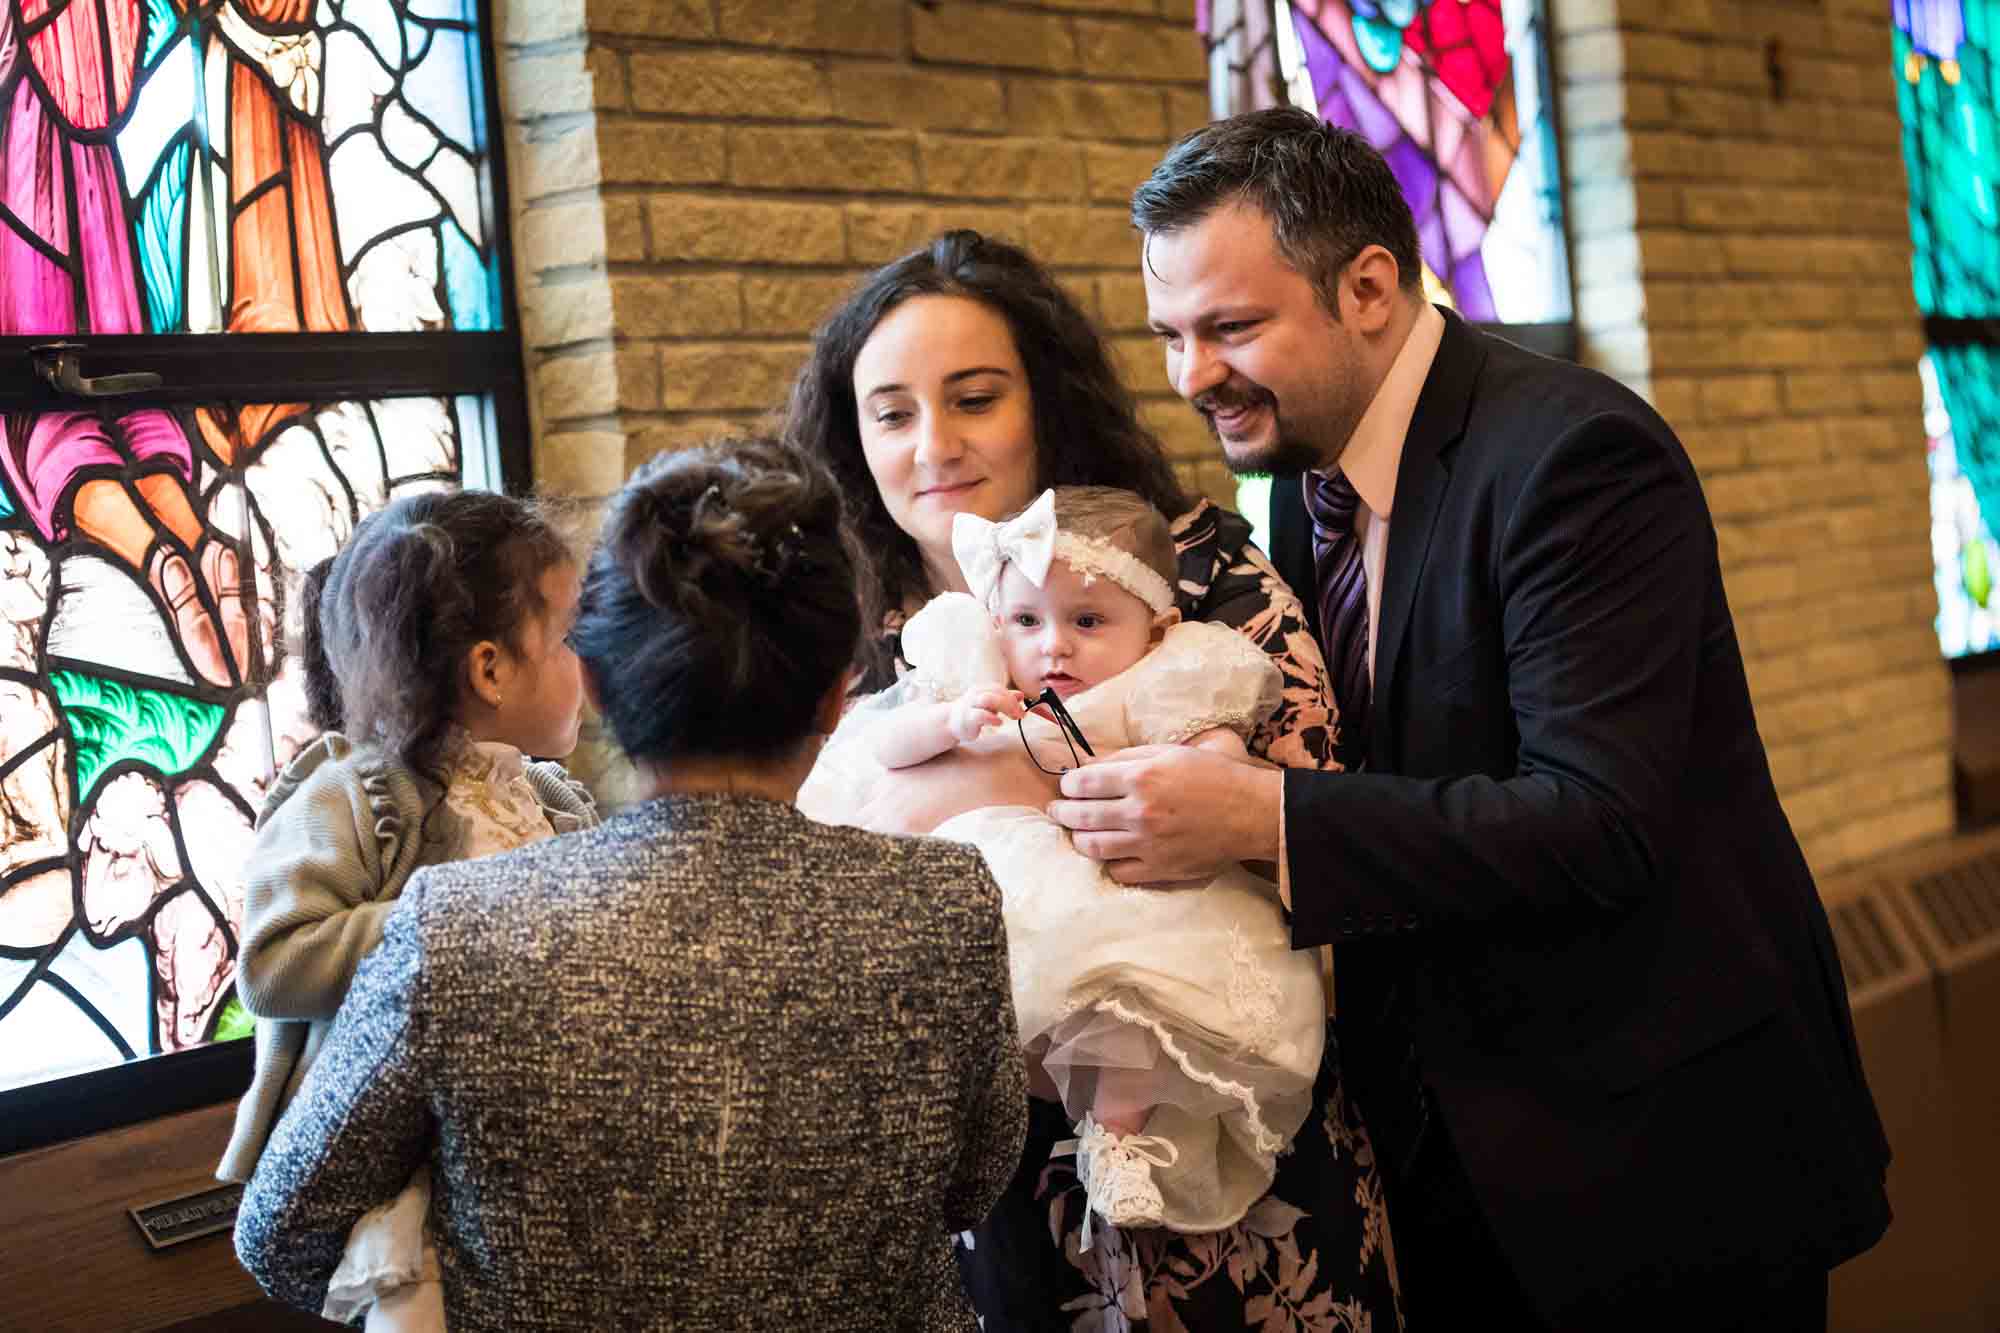 Maspeth baptism photos of parents showing baby to family members in front of stained glass windows